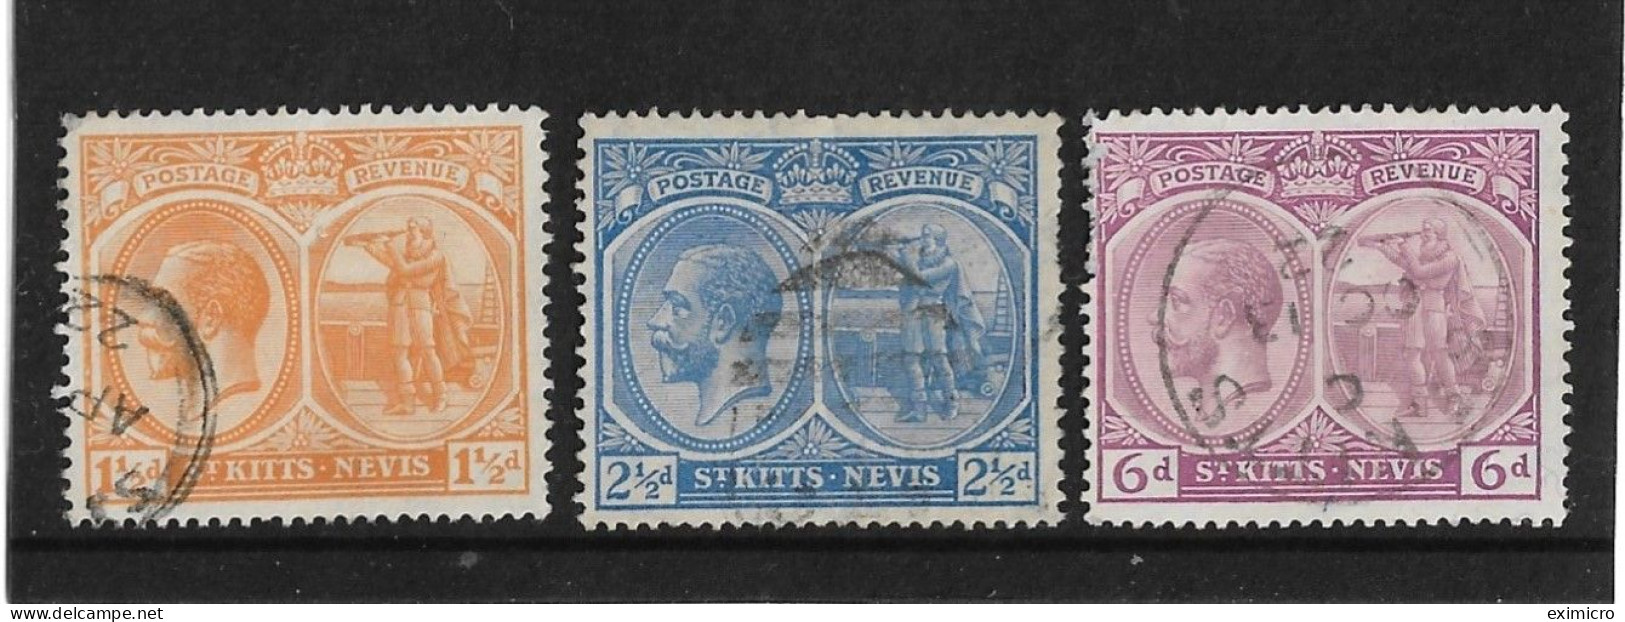 ST. KITTS - NEVIS 1920 - 1922 WATERMARK MULTIPLE CROWN CA 1½d, 2½d, 6d SG 26,28,30 FINE USED Cat £21.75 - St.Christopher-Nevis-Anguilla (...-1980)